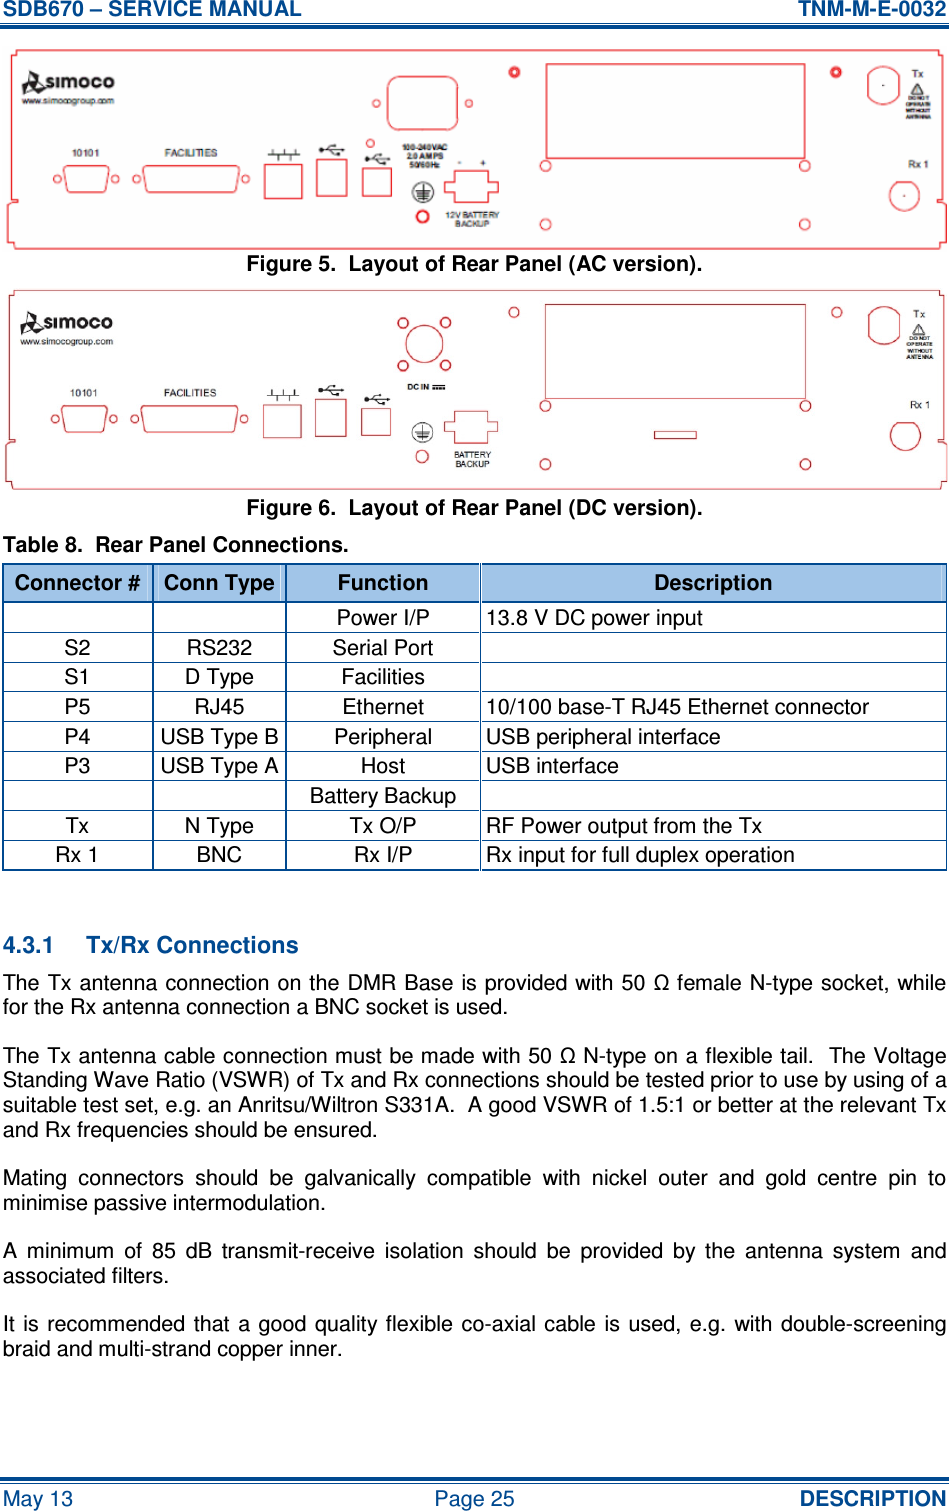 SDB670 – SERVICE MANUAL  TNM-M-E-0032 May 13  Page 25  DESCRIPTION Figure 5.  Layout of Rear Panel (AC version). Figure 6.  Layout of Rear Panel (DC version). Table 8.  Rear Panel Connections. Connector # Conn Type Function  Description     Power I/P  13.8 V DC power input S2  RS232  Serial Port   S1  D Type  Facilities   P5  RJ45  Ethernet  10/100 base-T RJ45 Ethernet connector P4  USB Type B Peripheral  USB peripheral interface P3  USB Type A Host  USB interface     Battery Backup   Tx  N Type  Tx O/P  RF Power output from the Tx Rx 1  BNC  Rx I/P  Rx input for full duplex operation  4.3.1  Tx/Rx Connections The Tx antenna connection on the DMR Base is provided with 50 Ω female N-type socket, while for the Rx antenna connection a BNC socket is used. The Tx antenna cable connection must be made with 50 Ω N-type on a flexible tail.  The Voltage Standing Wave Ratio (VSWR) of Tx and Rx connections should be tested prior to use by using of a suitable test set, e.g. an Anritsu/Wiltron S331A.  A good VSWR of 1.5:1 or better at the relevant Tx and Rx frequencies should be ensured. Mating  connectors  should  be  galvanically  compatible  with  nickel  outer  and  gold  centre  pin  to minimise passive intermodulation. A  minimum  of  85  dB  transmit-receive  isolation  should  be  provided  by  the  antenna  system  and associated filters. It is recommended  that  a  good  quality flexible co-axial cable  is  used,  e.g.  with double-screening braid and multi-strand copper inner. 